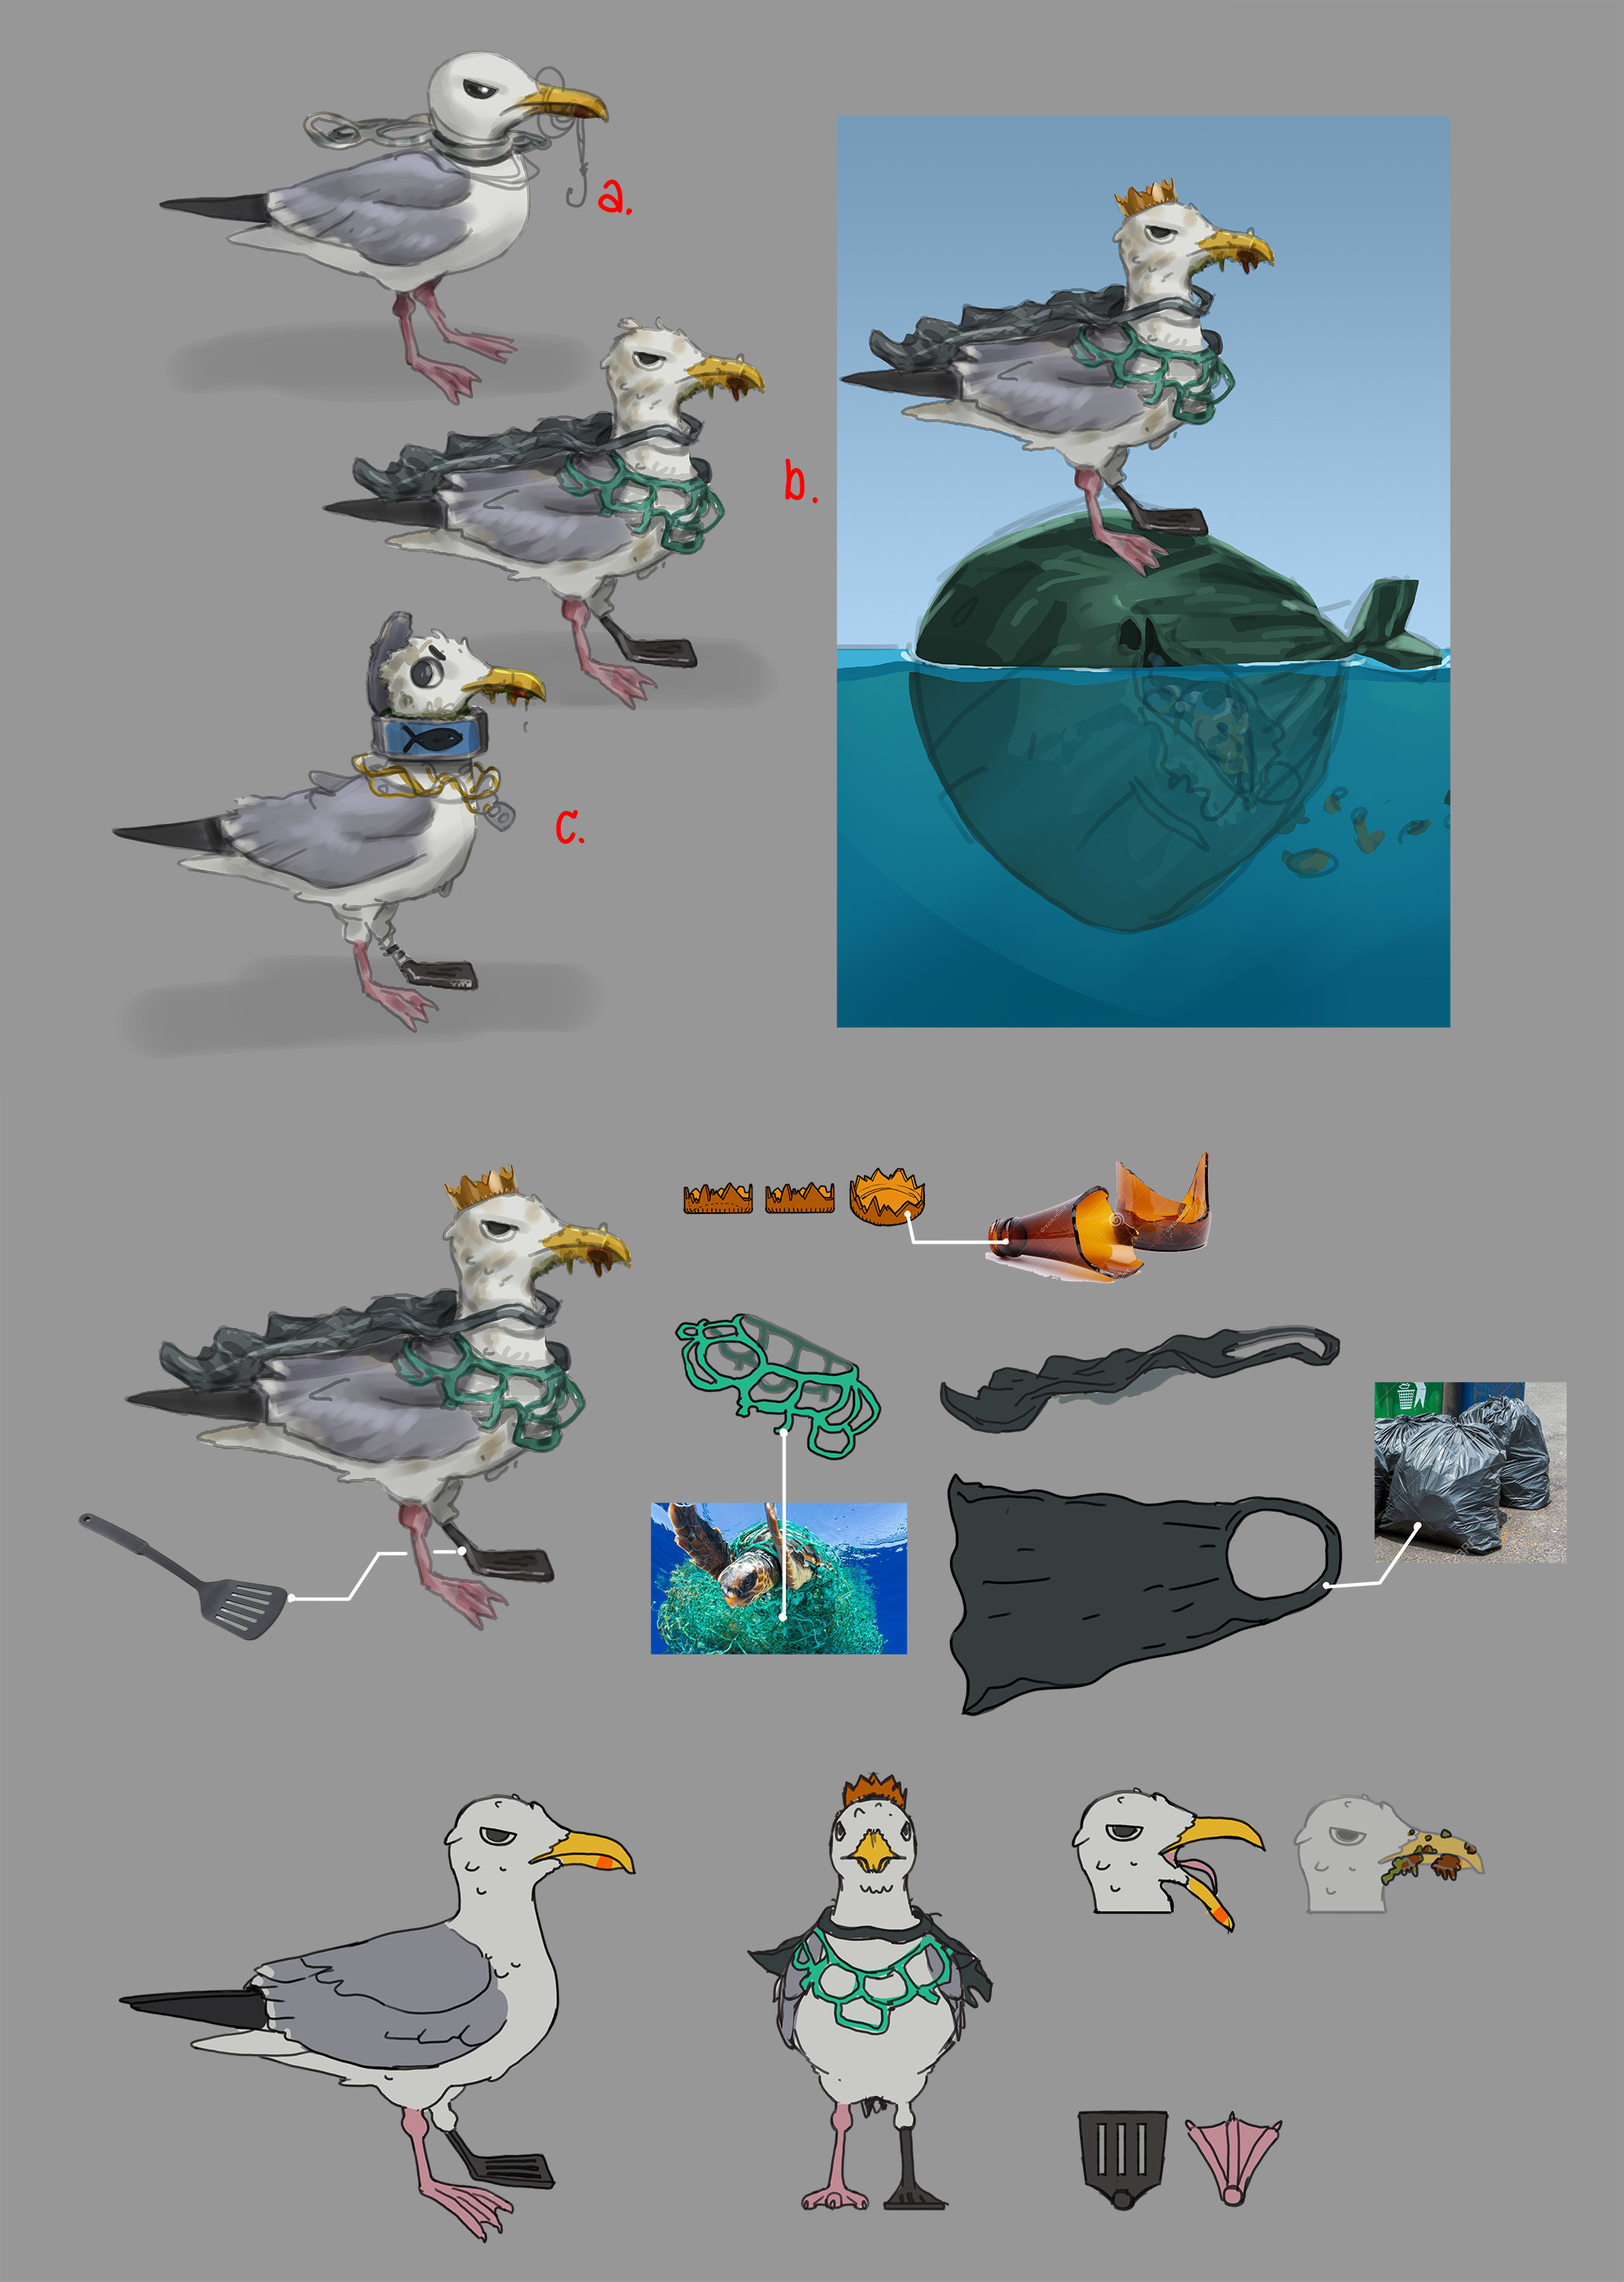 Villain Concept and breakdown

The villain represented pollution by becoming corrupted by man-made garbage and living on and spreading trash.